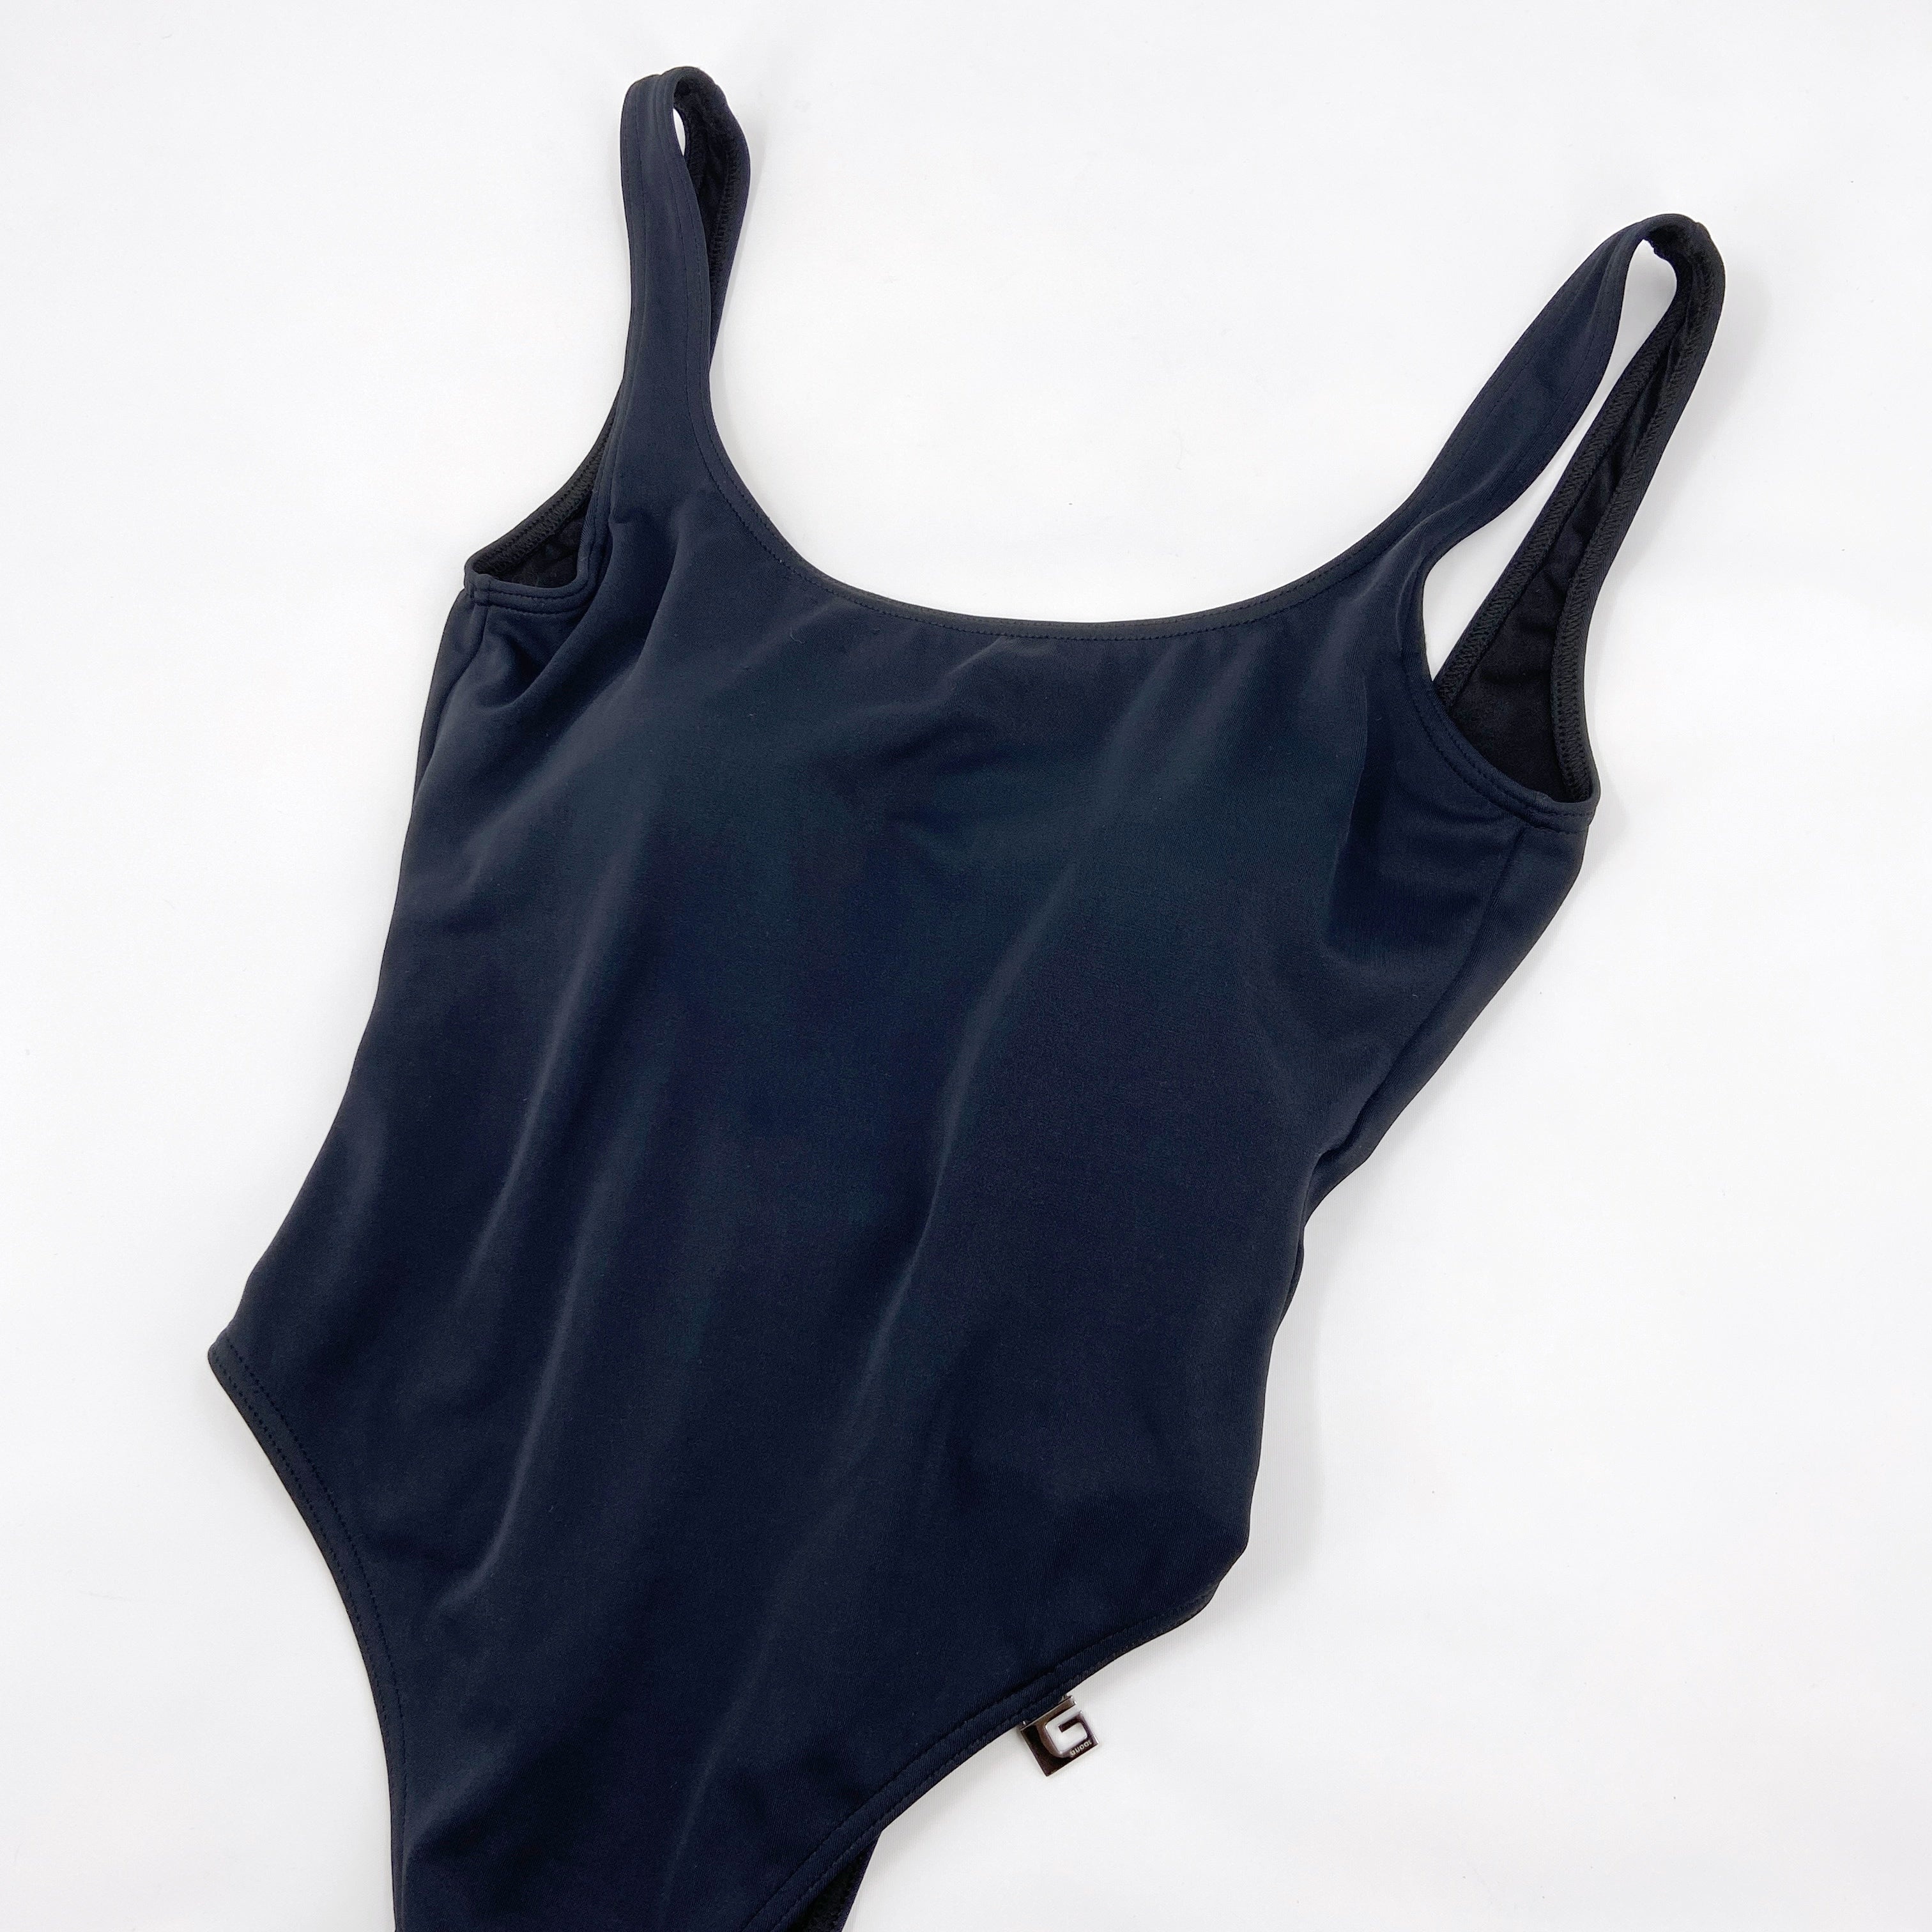 BWNT Gucci Spring 1999 Tom Ford Plunging Backless Navy One-Piece Swimsuit - 6